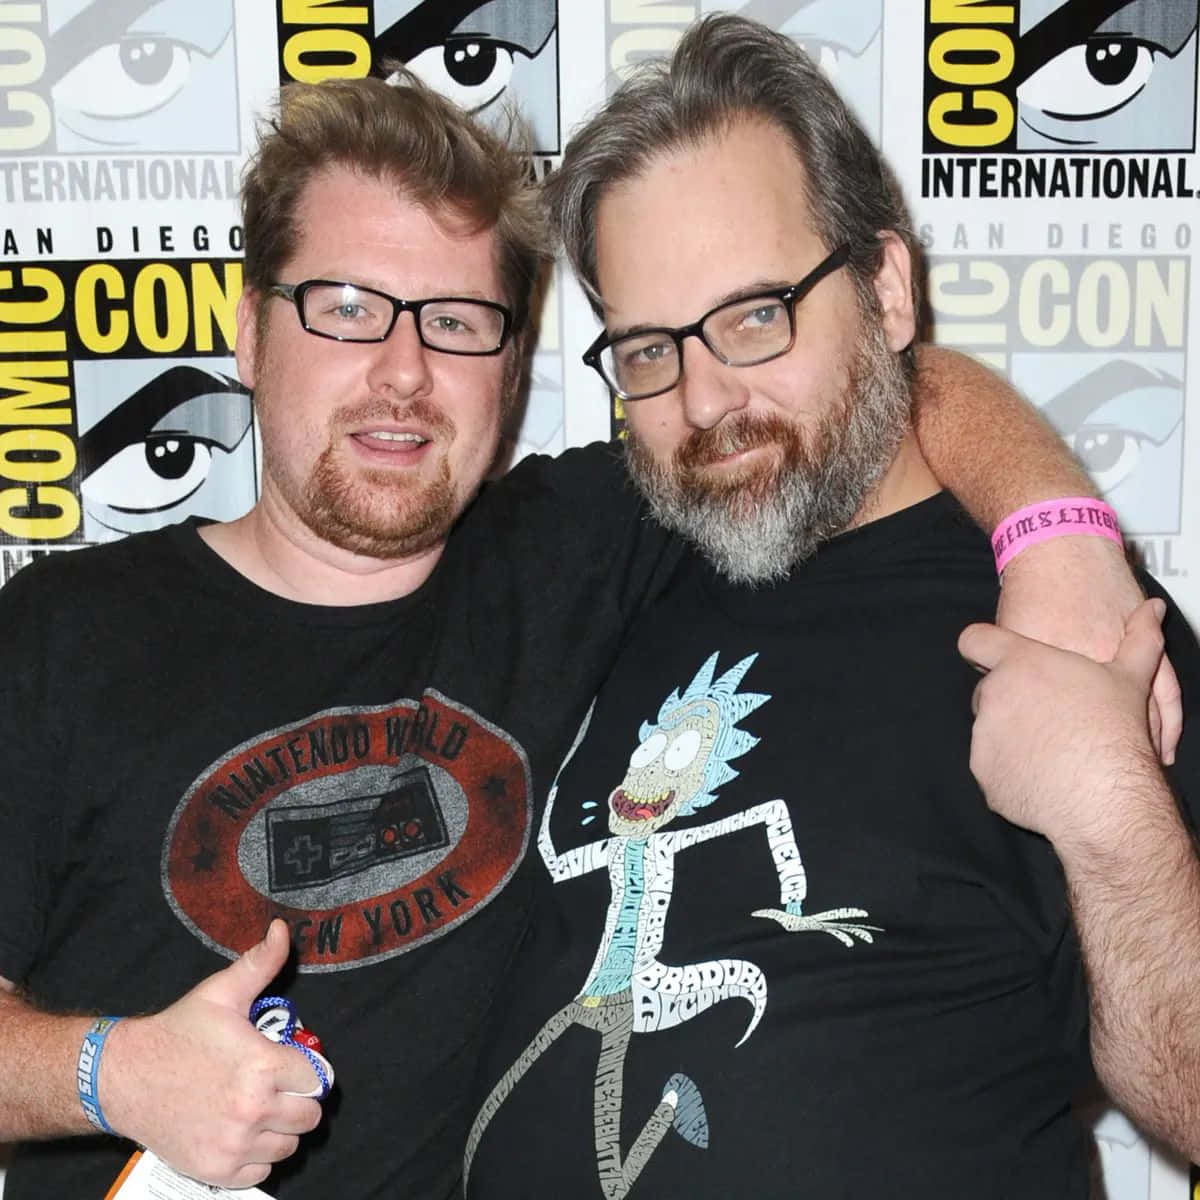 Justin Roiland posing with Rick and Morty's animated characters in the background. Wallpaper